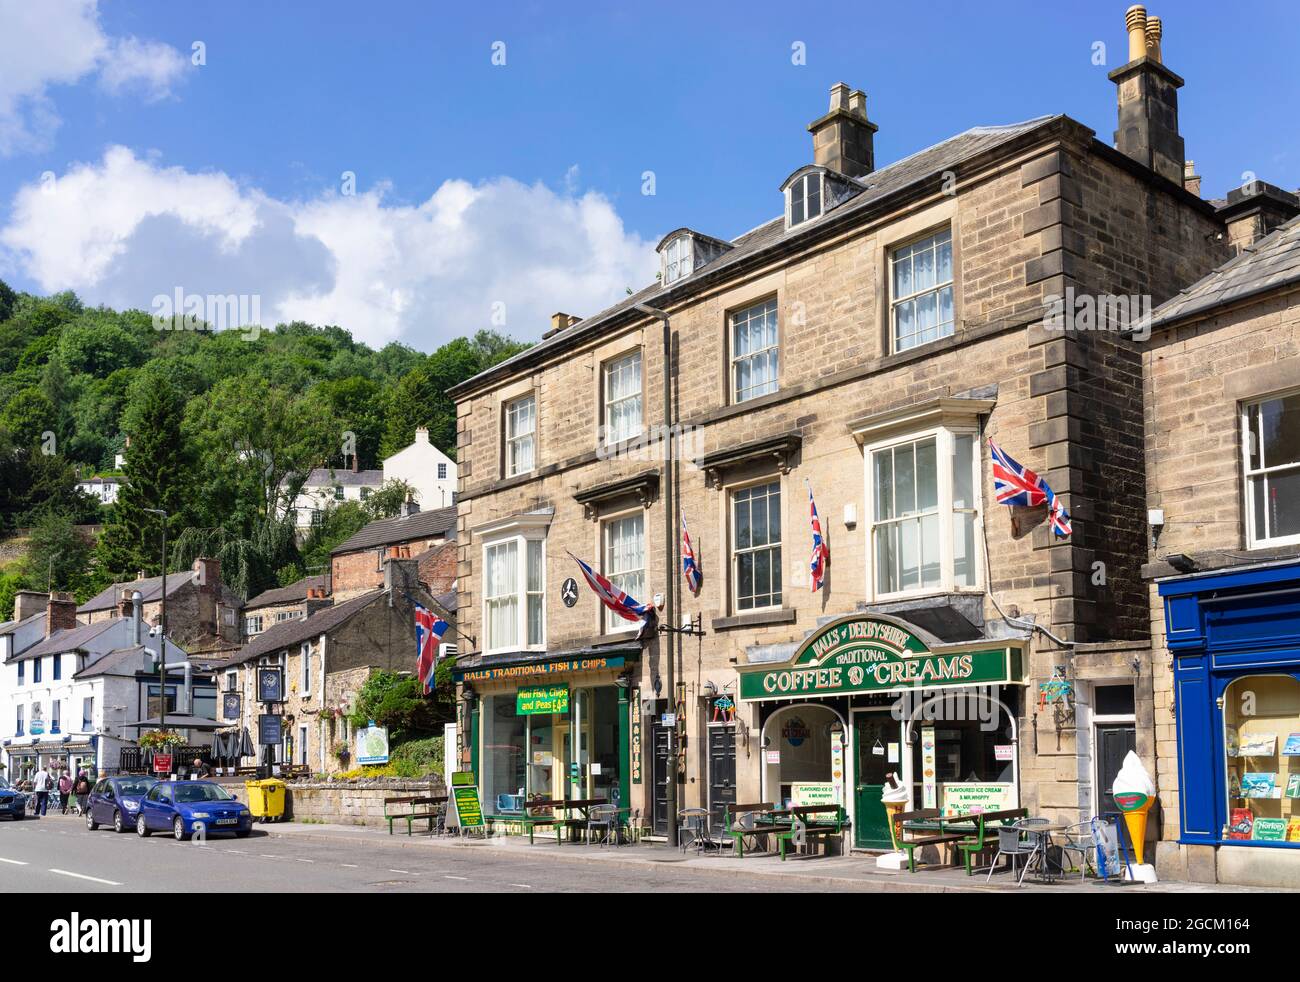 Matlock bath town centre with Halls Traditional Fish & Chips and Halls of Derbyshire coffee shop North Parade Derbyshire England UK GB Europe Stock Photo